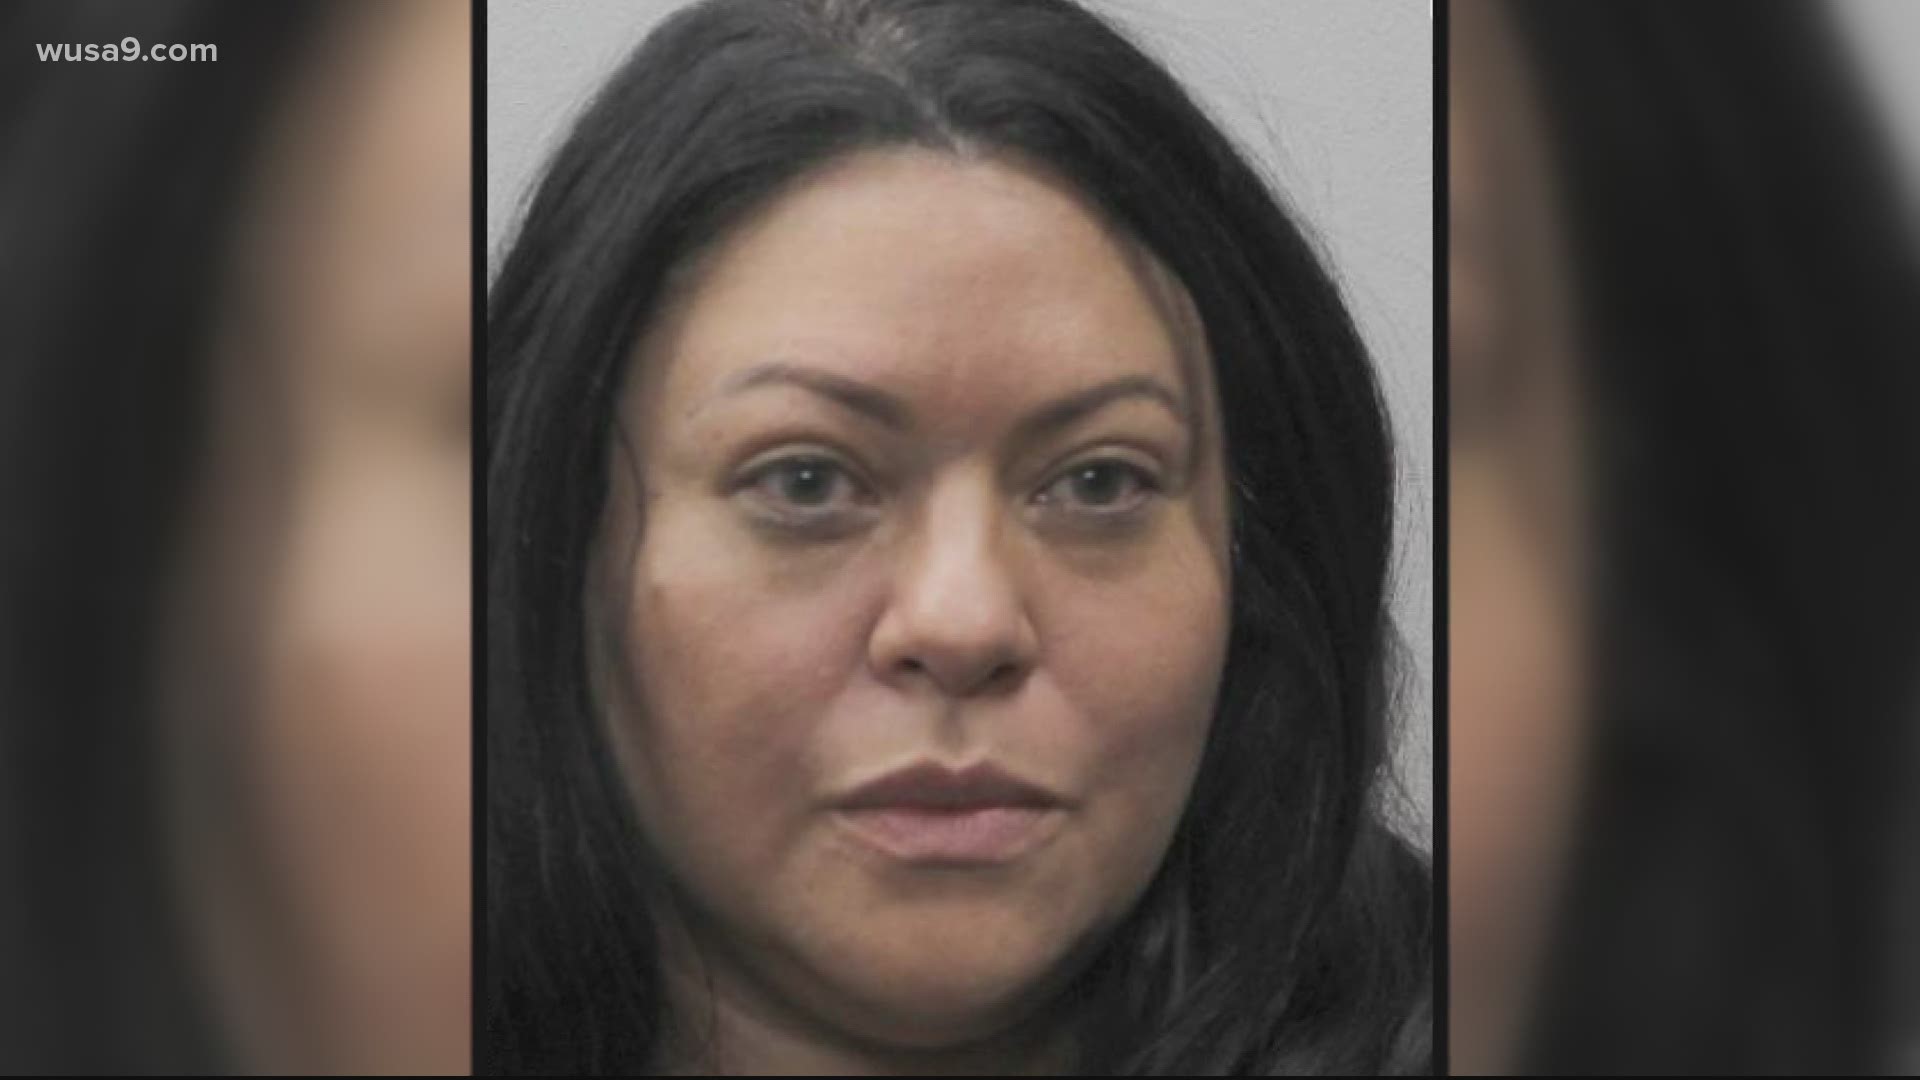 Jasmine Moawad was arrested and charged with two felonies. Police say she's a fake lawyer who bilked vulnerable people for services never rendered.